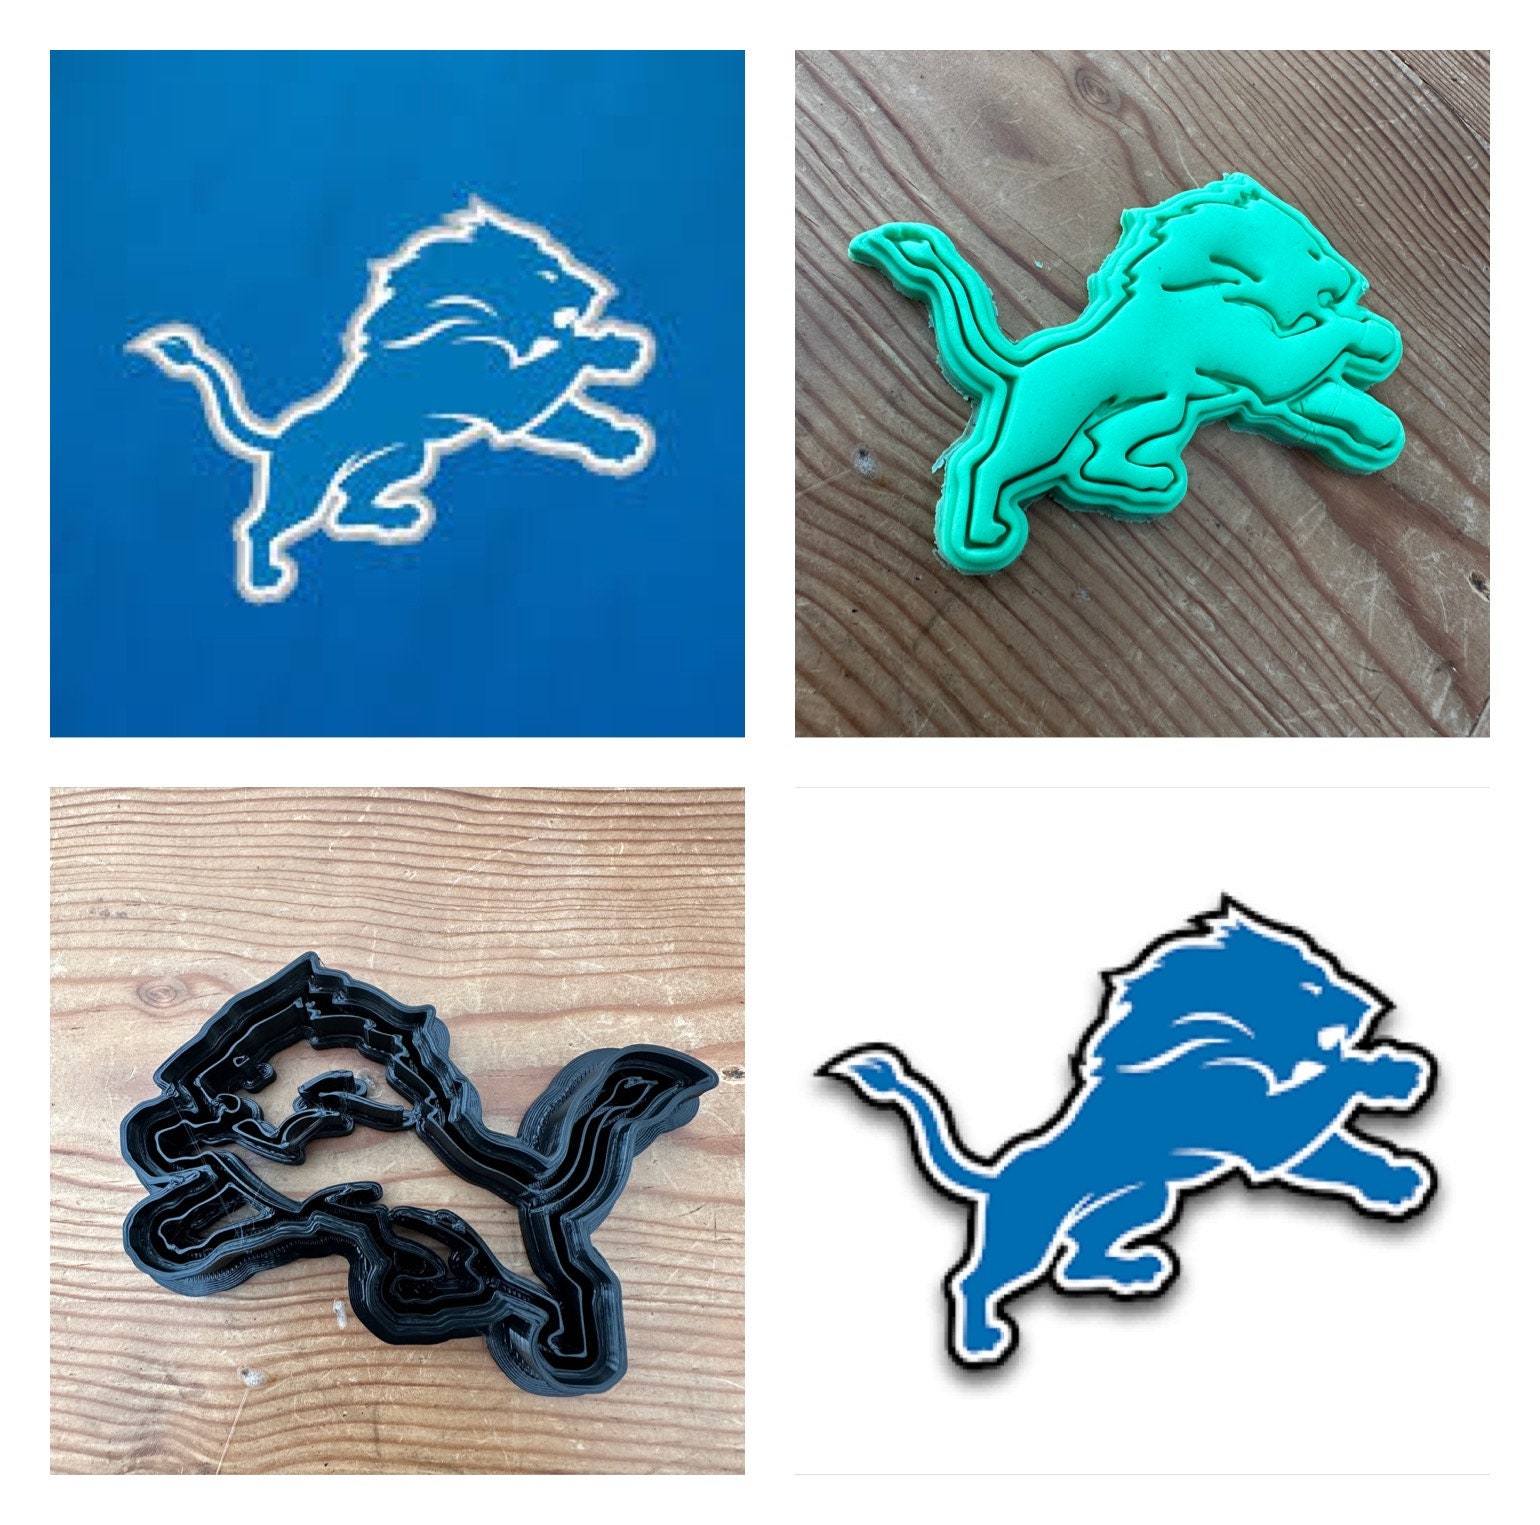 Detroit Lions Iron On Patches - Beyond Vision Mall